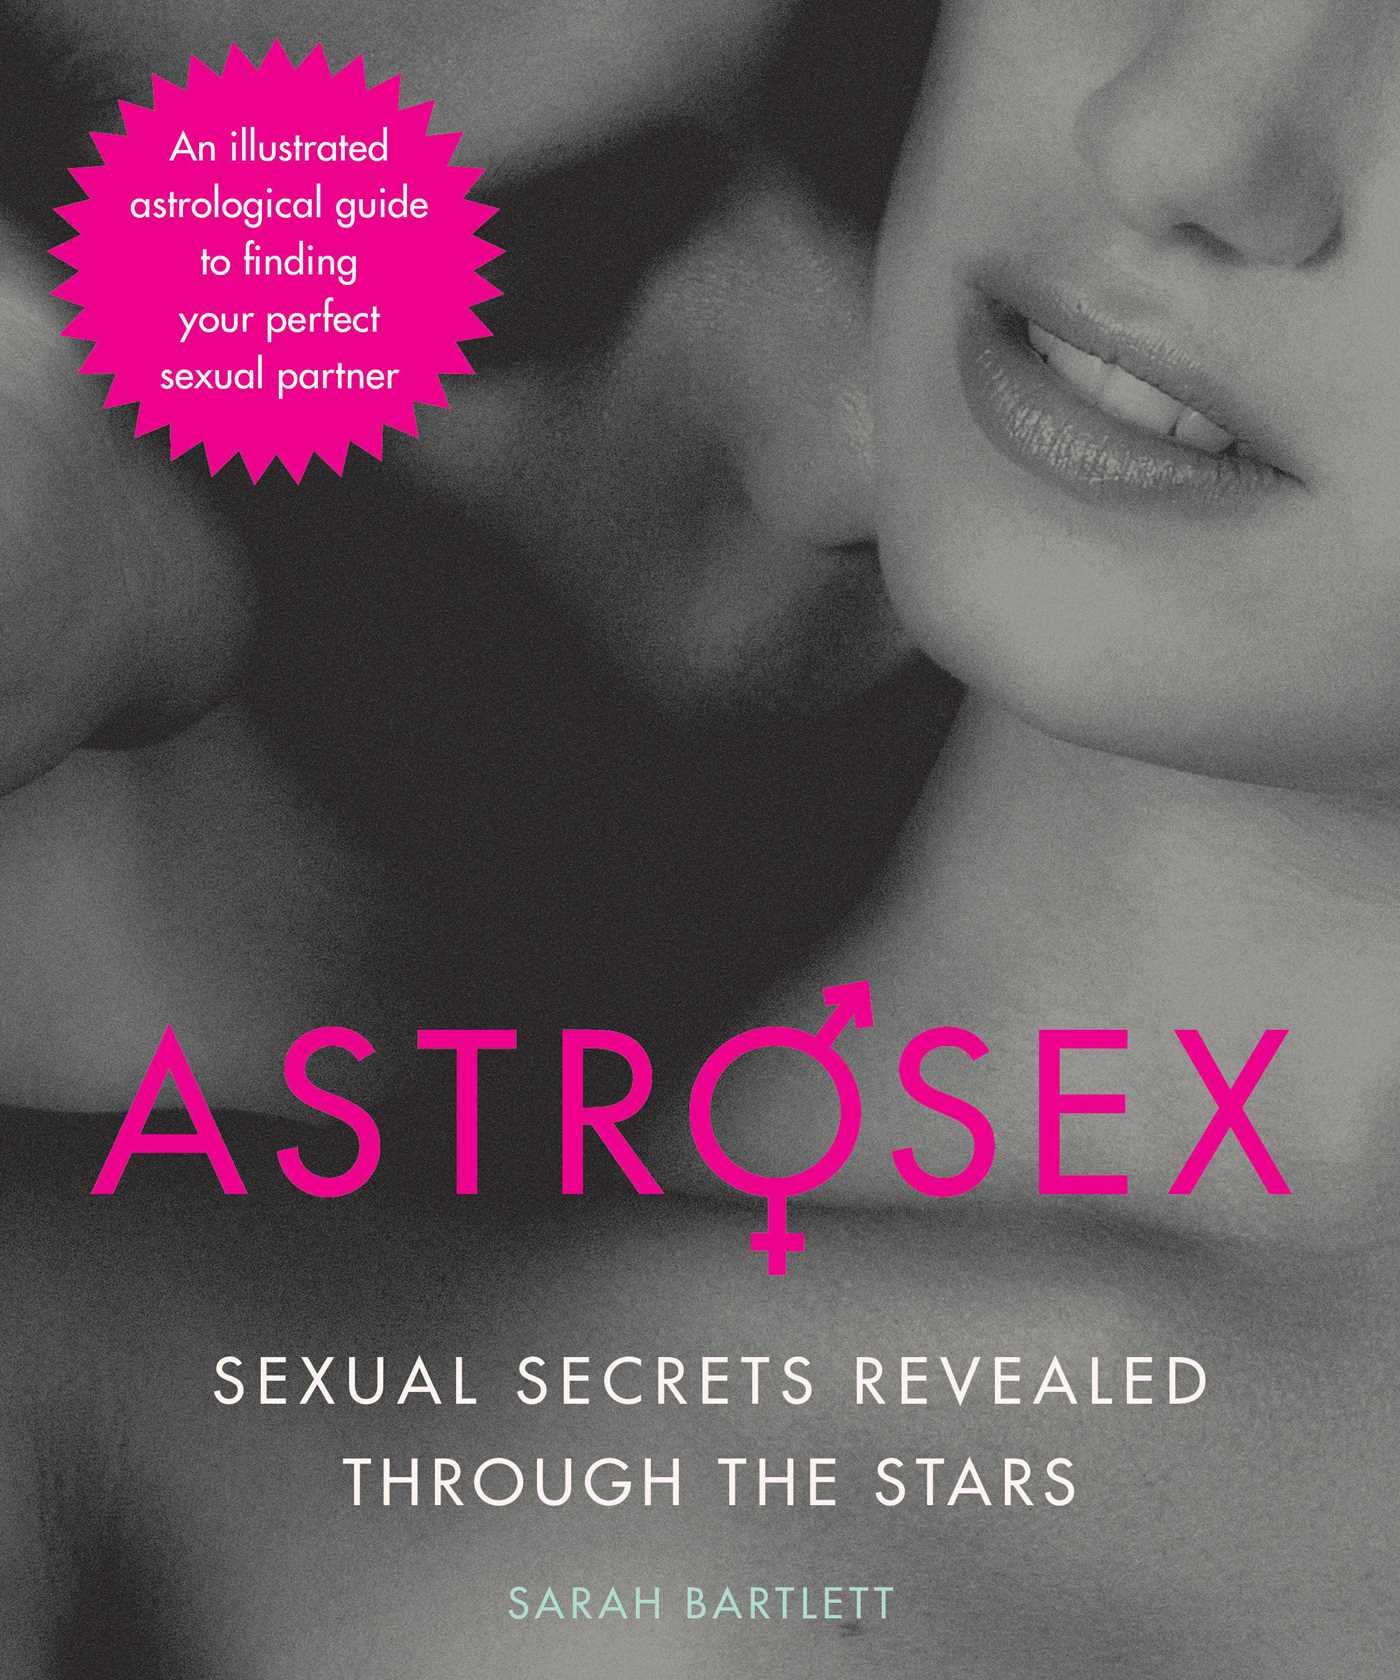 Astrosex Sexual Secrets Revealed through the Stars by Sarah Bartlett picture